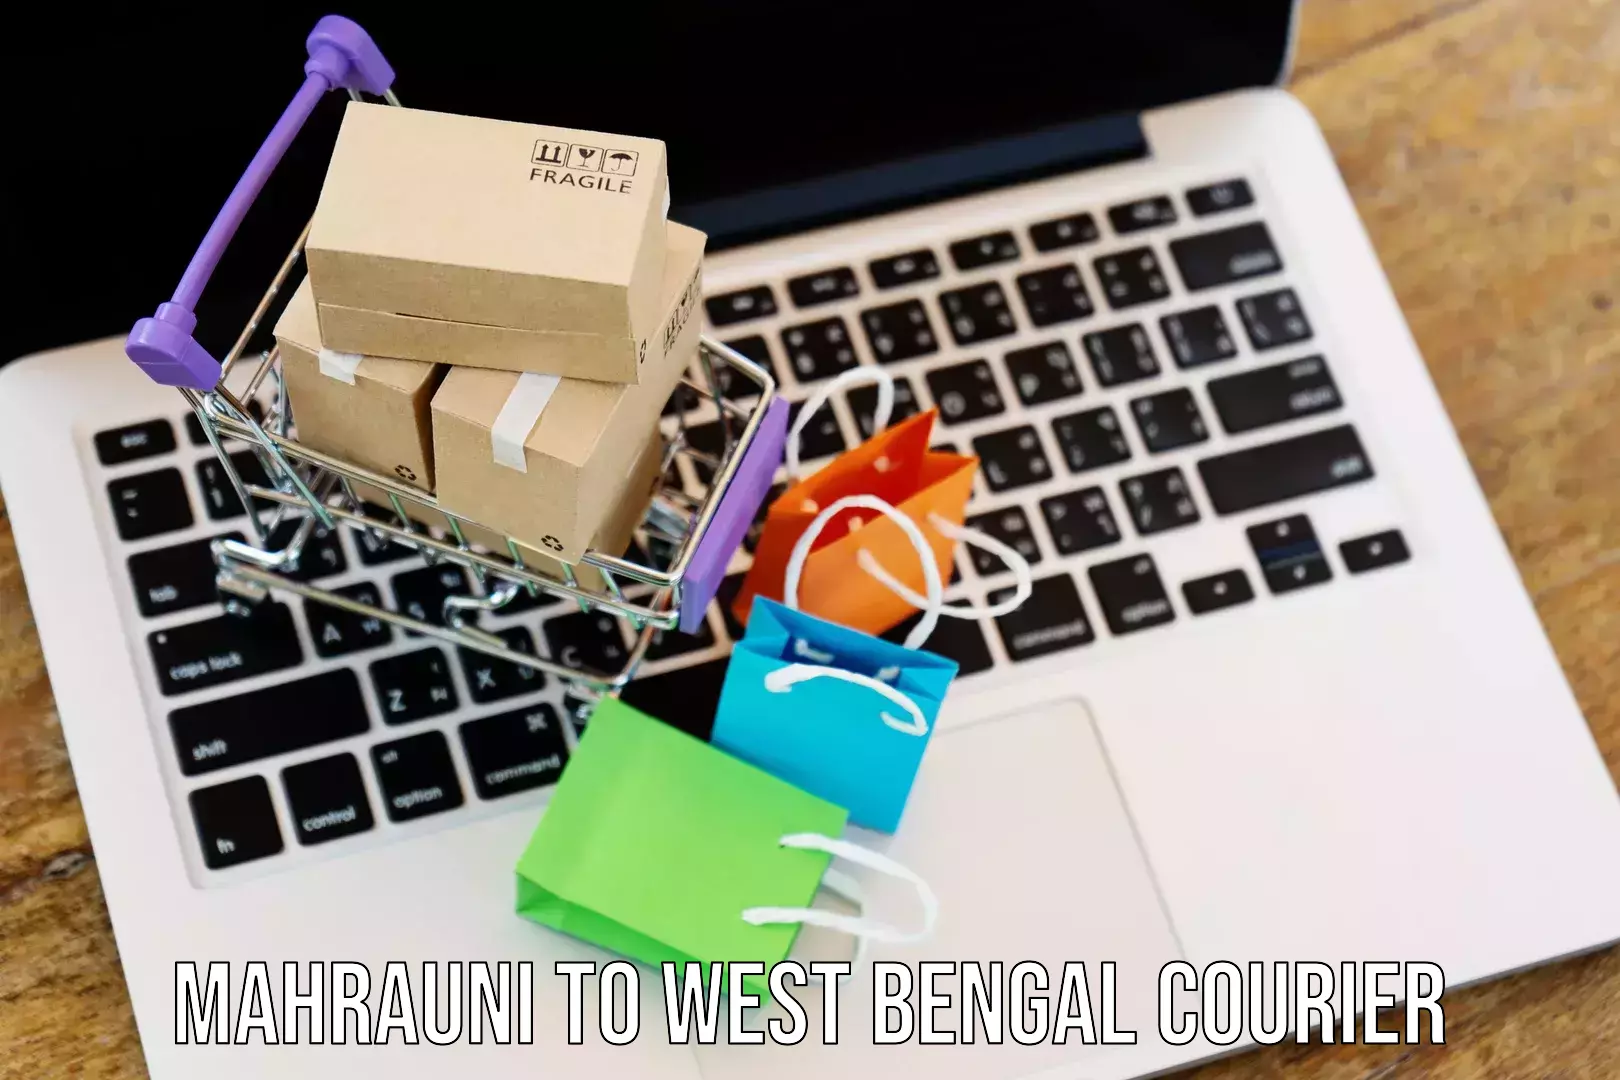 Parcel delivery automation Mahrauni to West Bengal